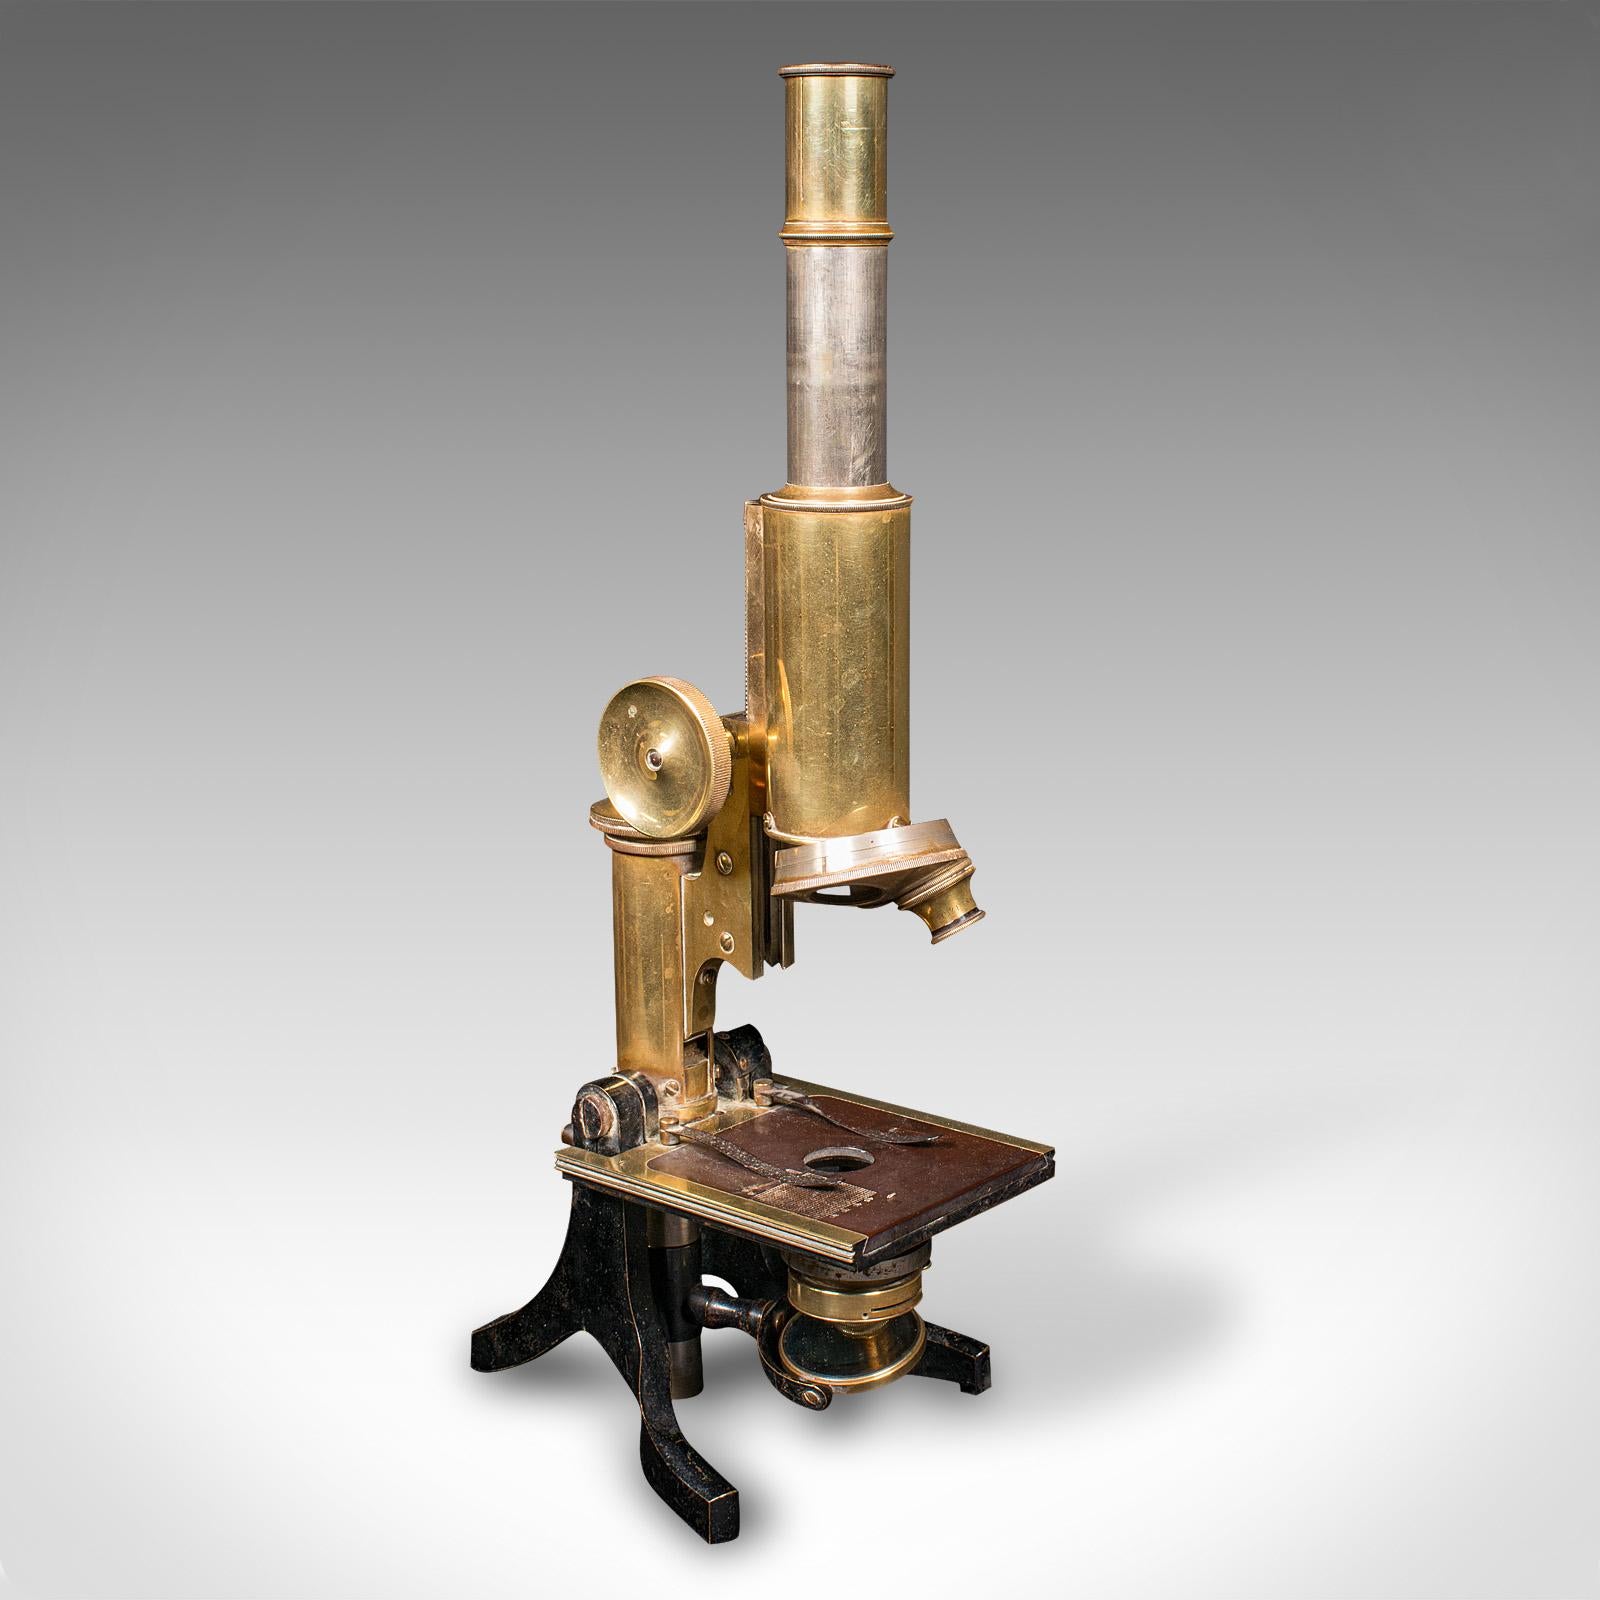 This is an antique cased microscope. An English, enamelled metal and brass scientific instrument by J. Swift & Son of London, dating to the late Victorian period, circa 1900.

Presented in a quality case, the microscope of appealing Victorian